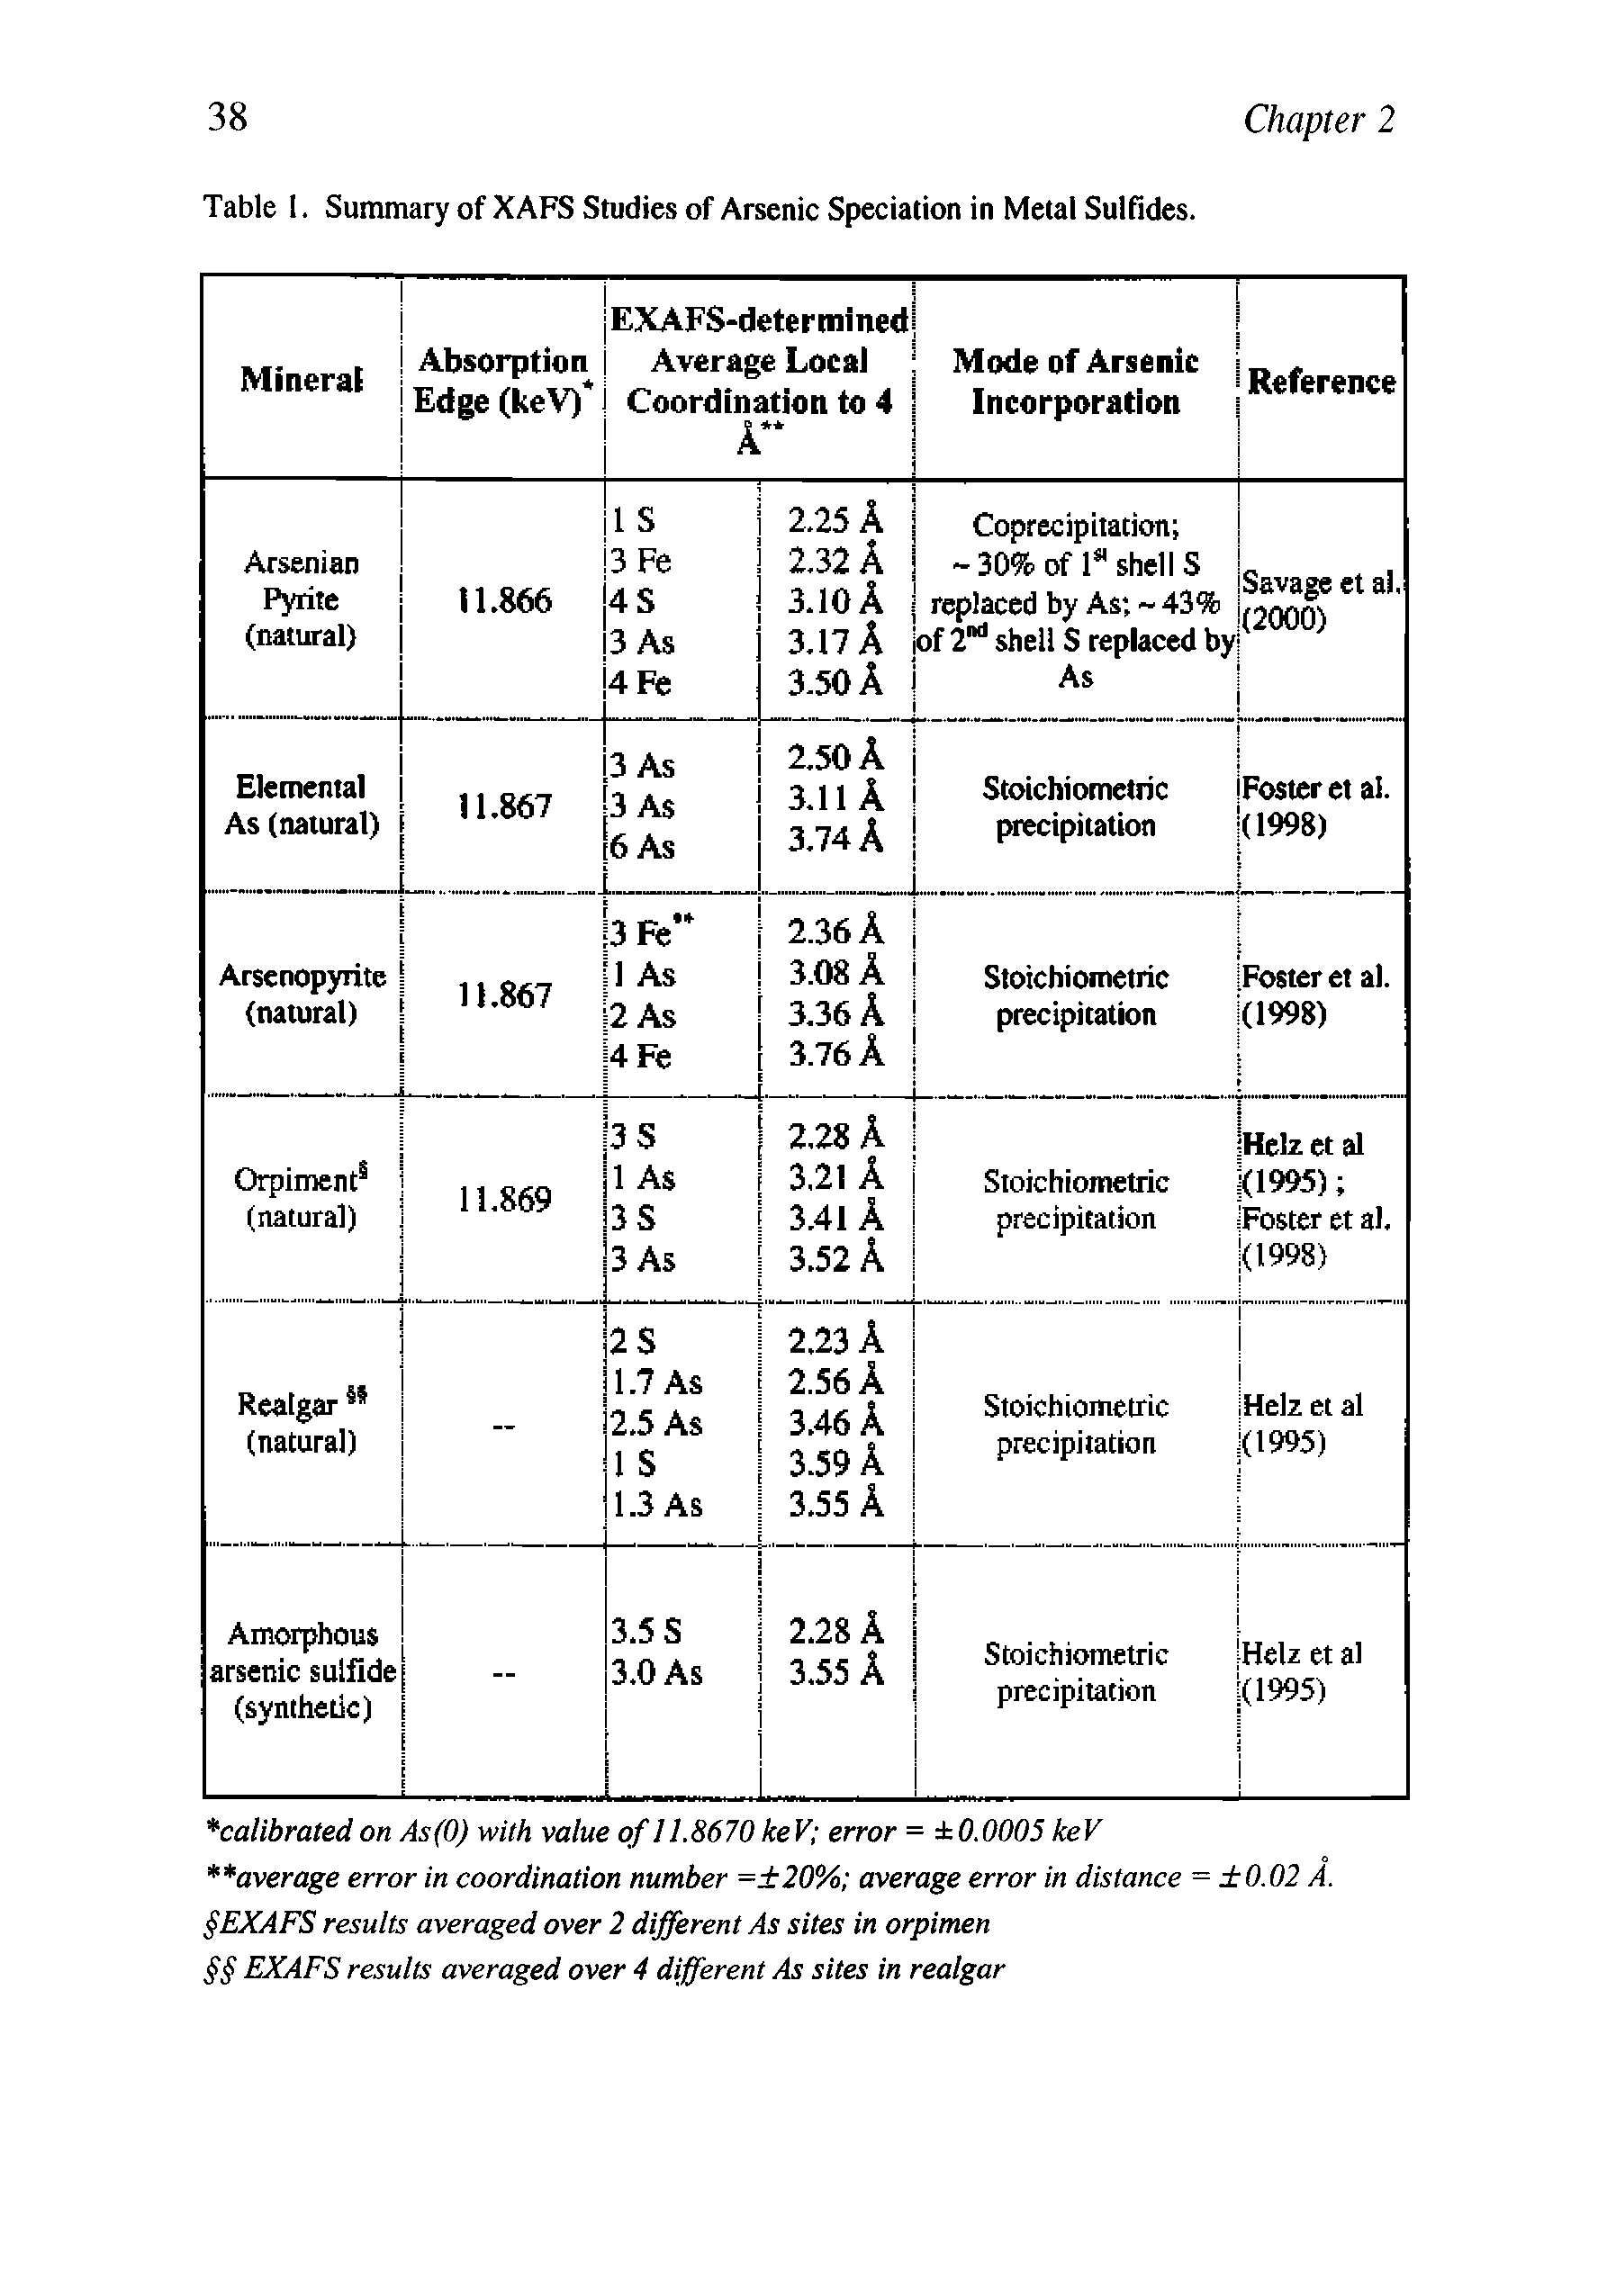 Table I. Summary of XAFS Studies of Arsenic Speciation in Metal Sulfides.